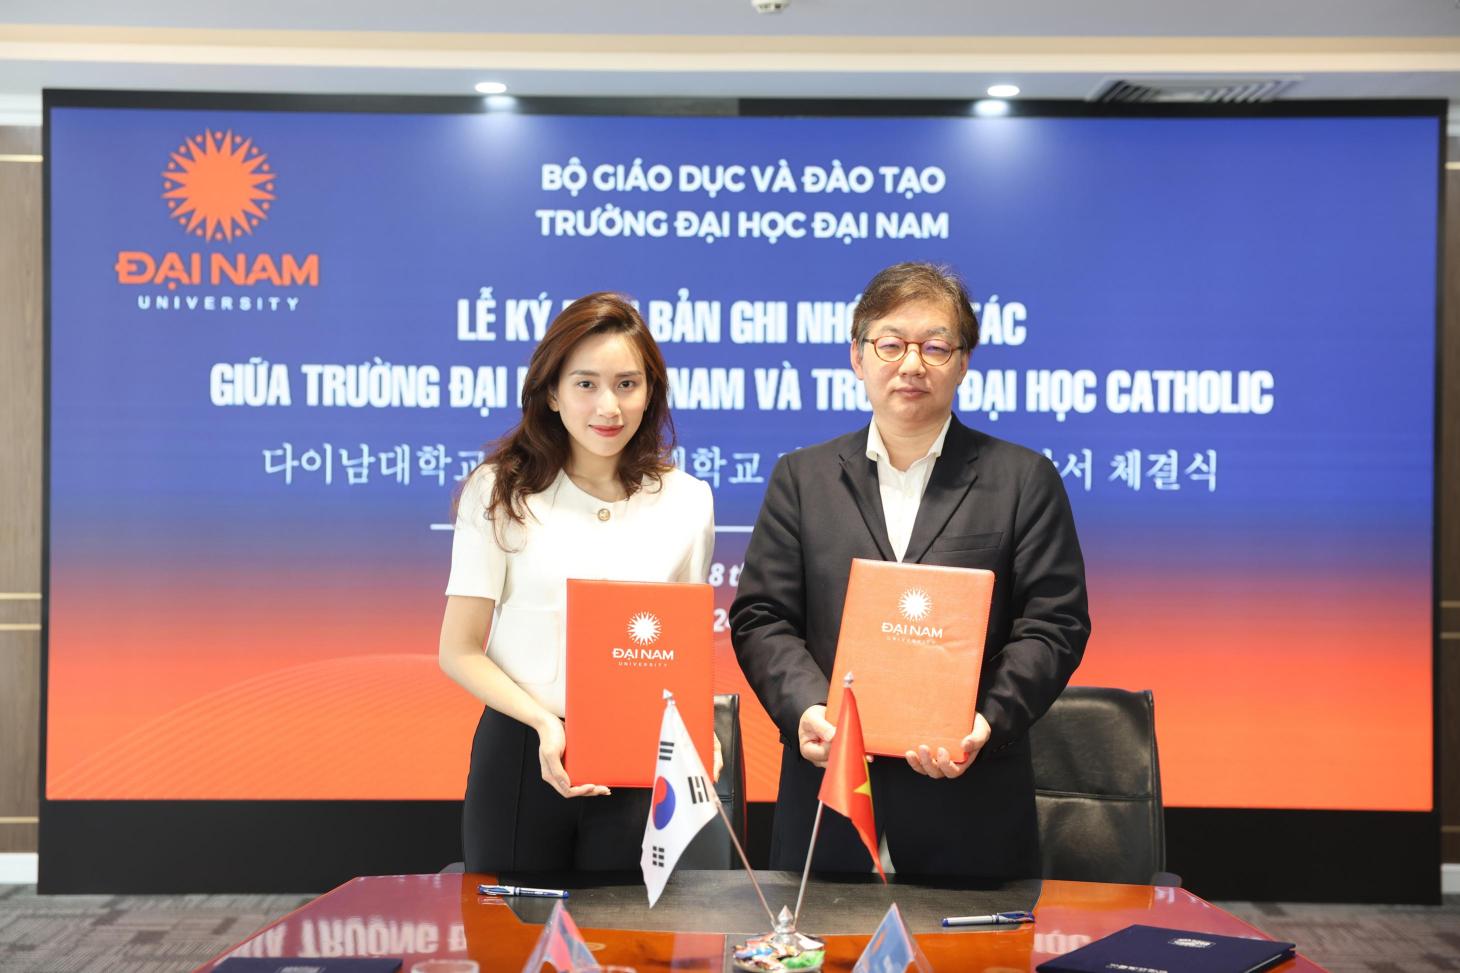 dai-nam-university-has-collaborated-with-catholic-university-top-52-best-universities-in-south-korea